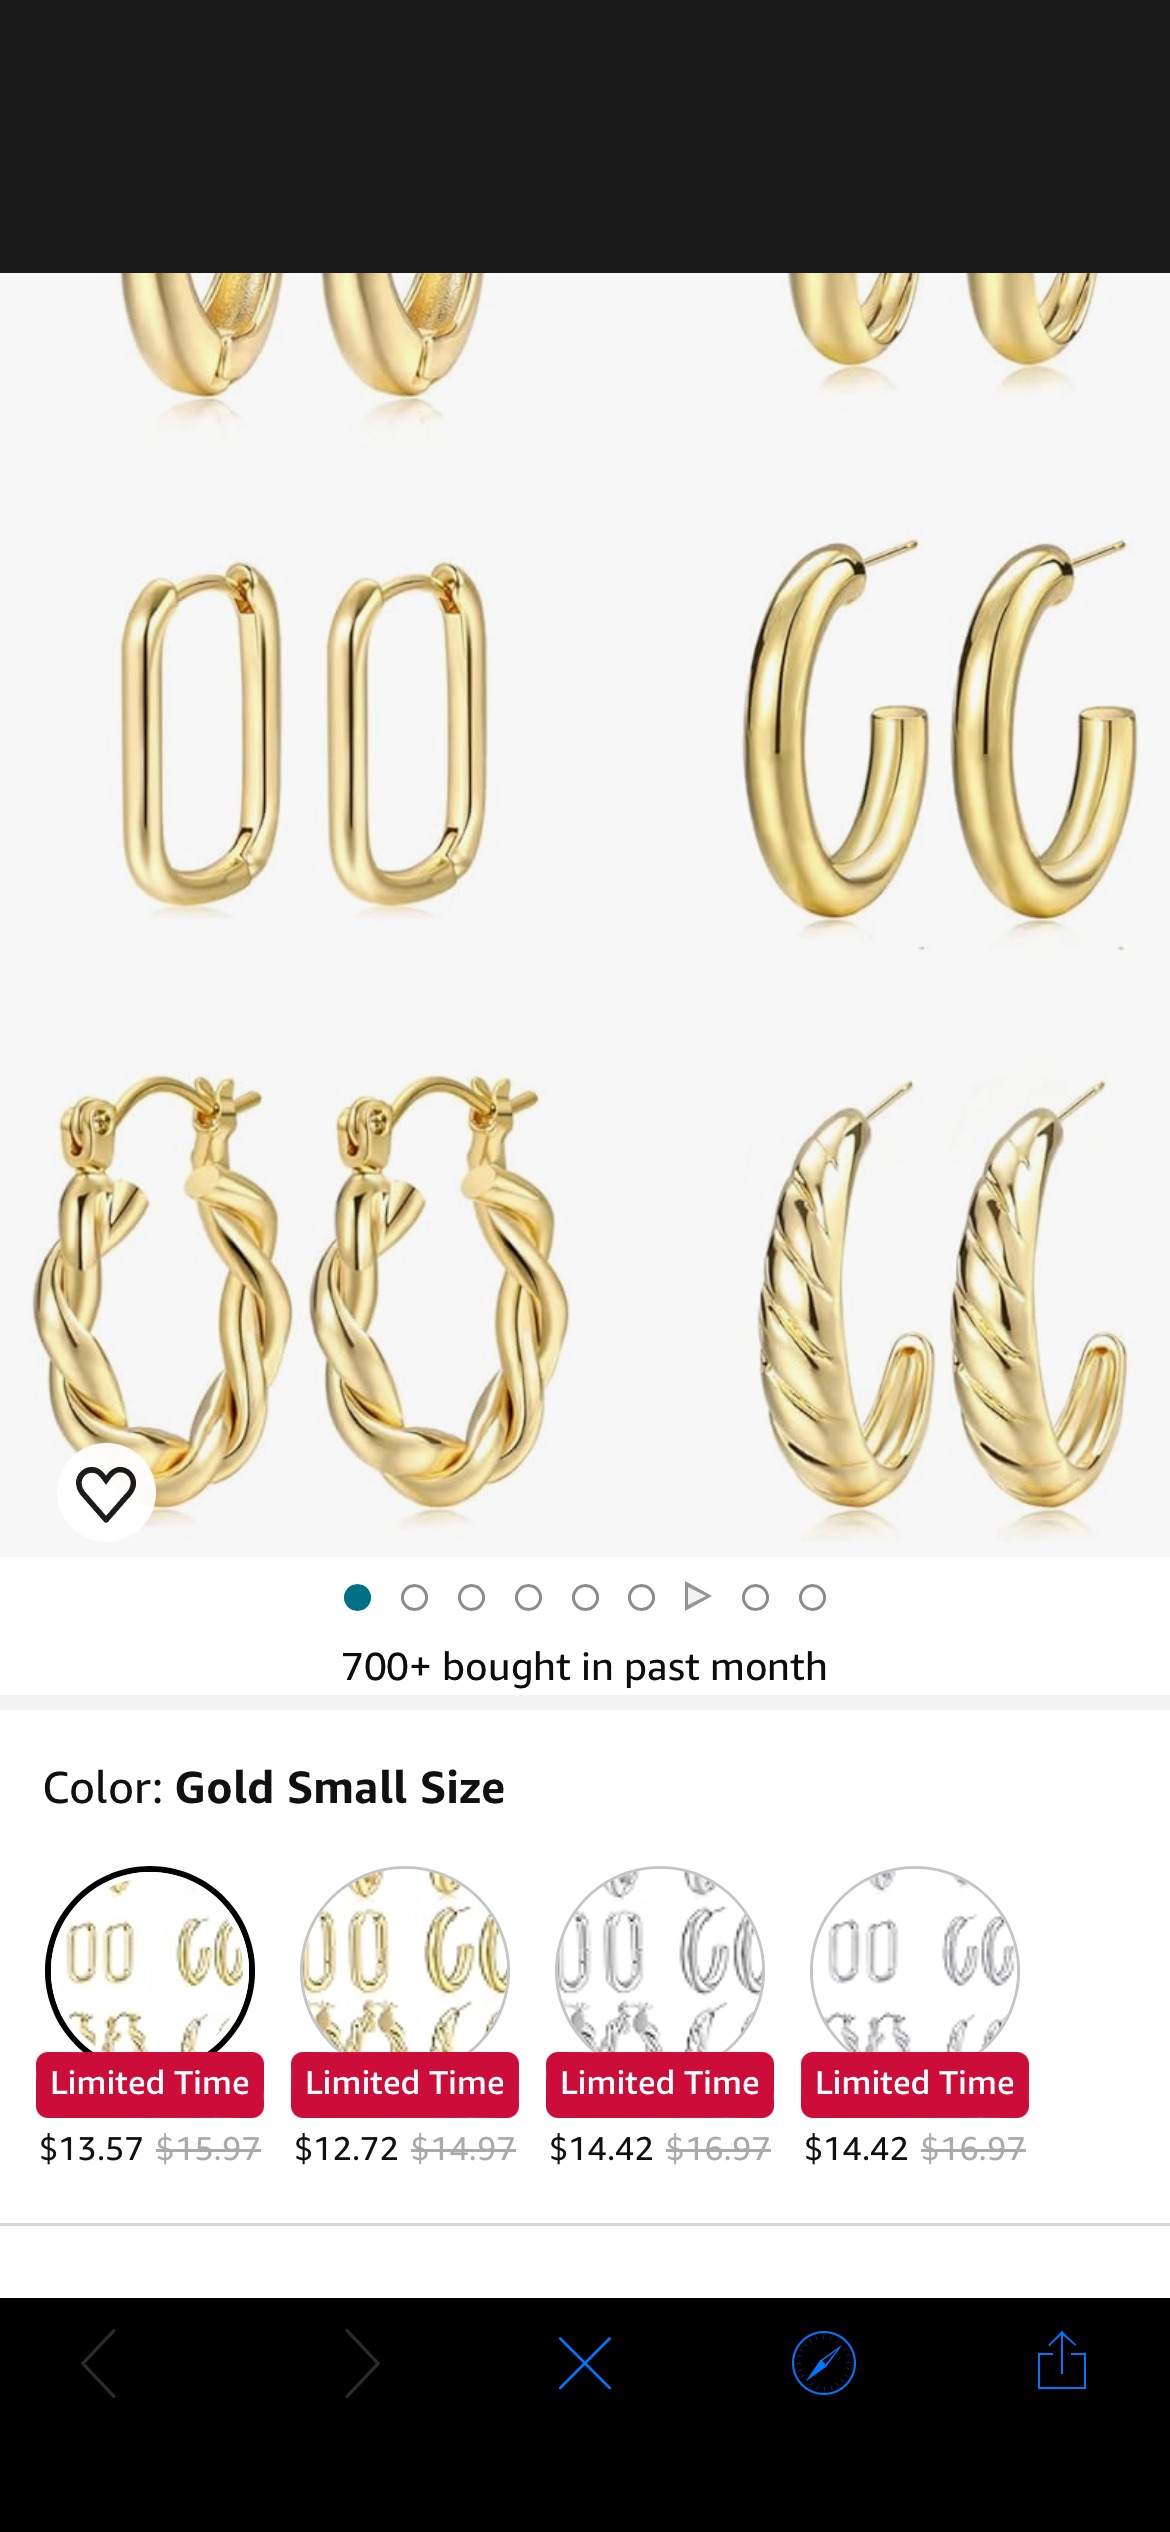 Amazon.com: Gold Hoop Earrings Set for Women, 14K Gold Plated Lightweight Hypoallergenic Chunky Open Hoops Set for Gift (Gold Small Size): Clothing, Shoes & Jewelry